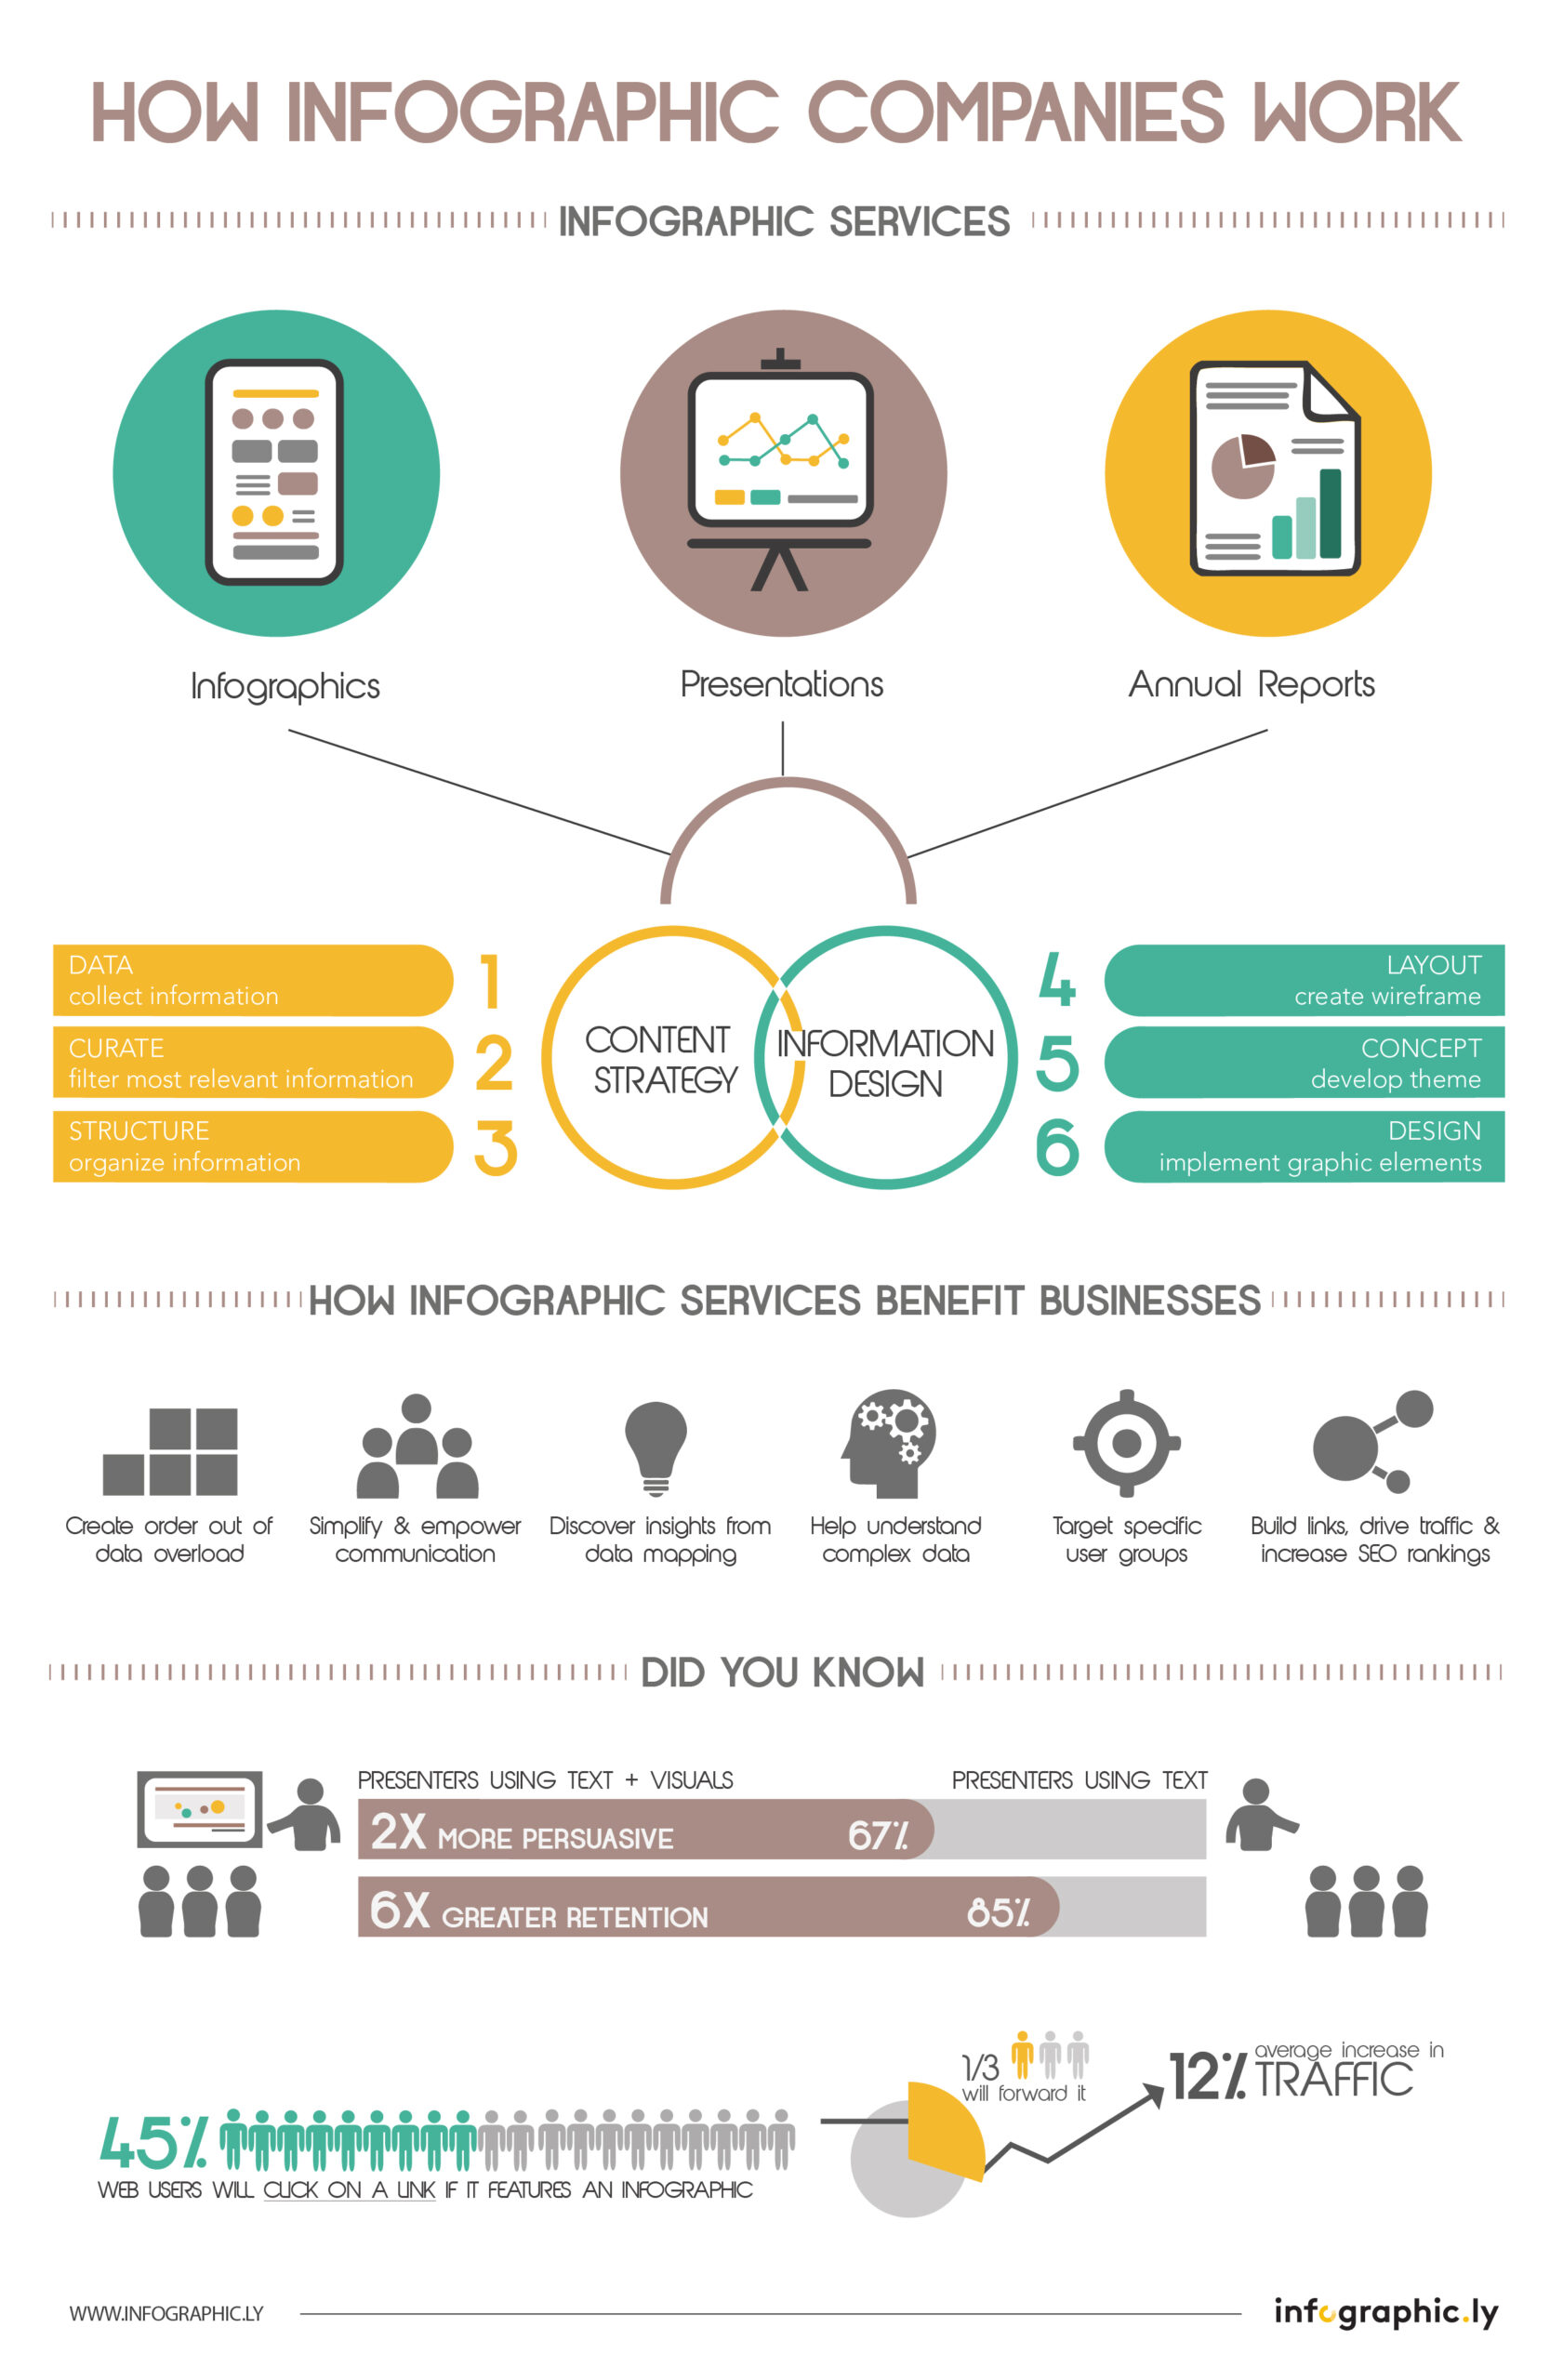 How to use an infographic to promote your business - 99designs